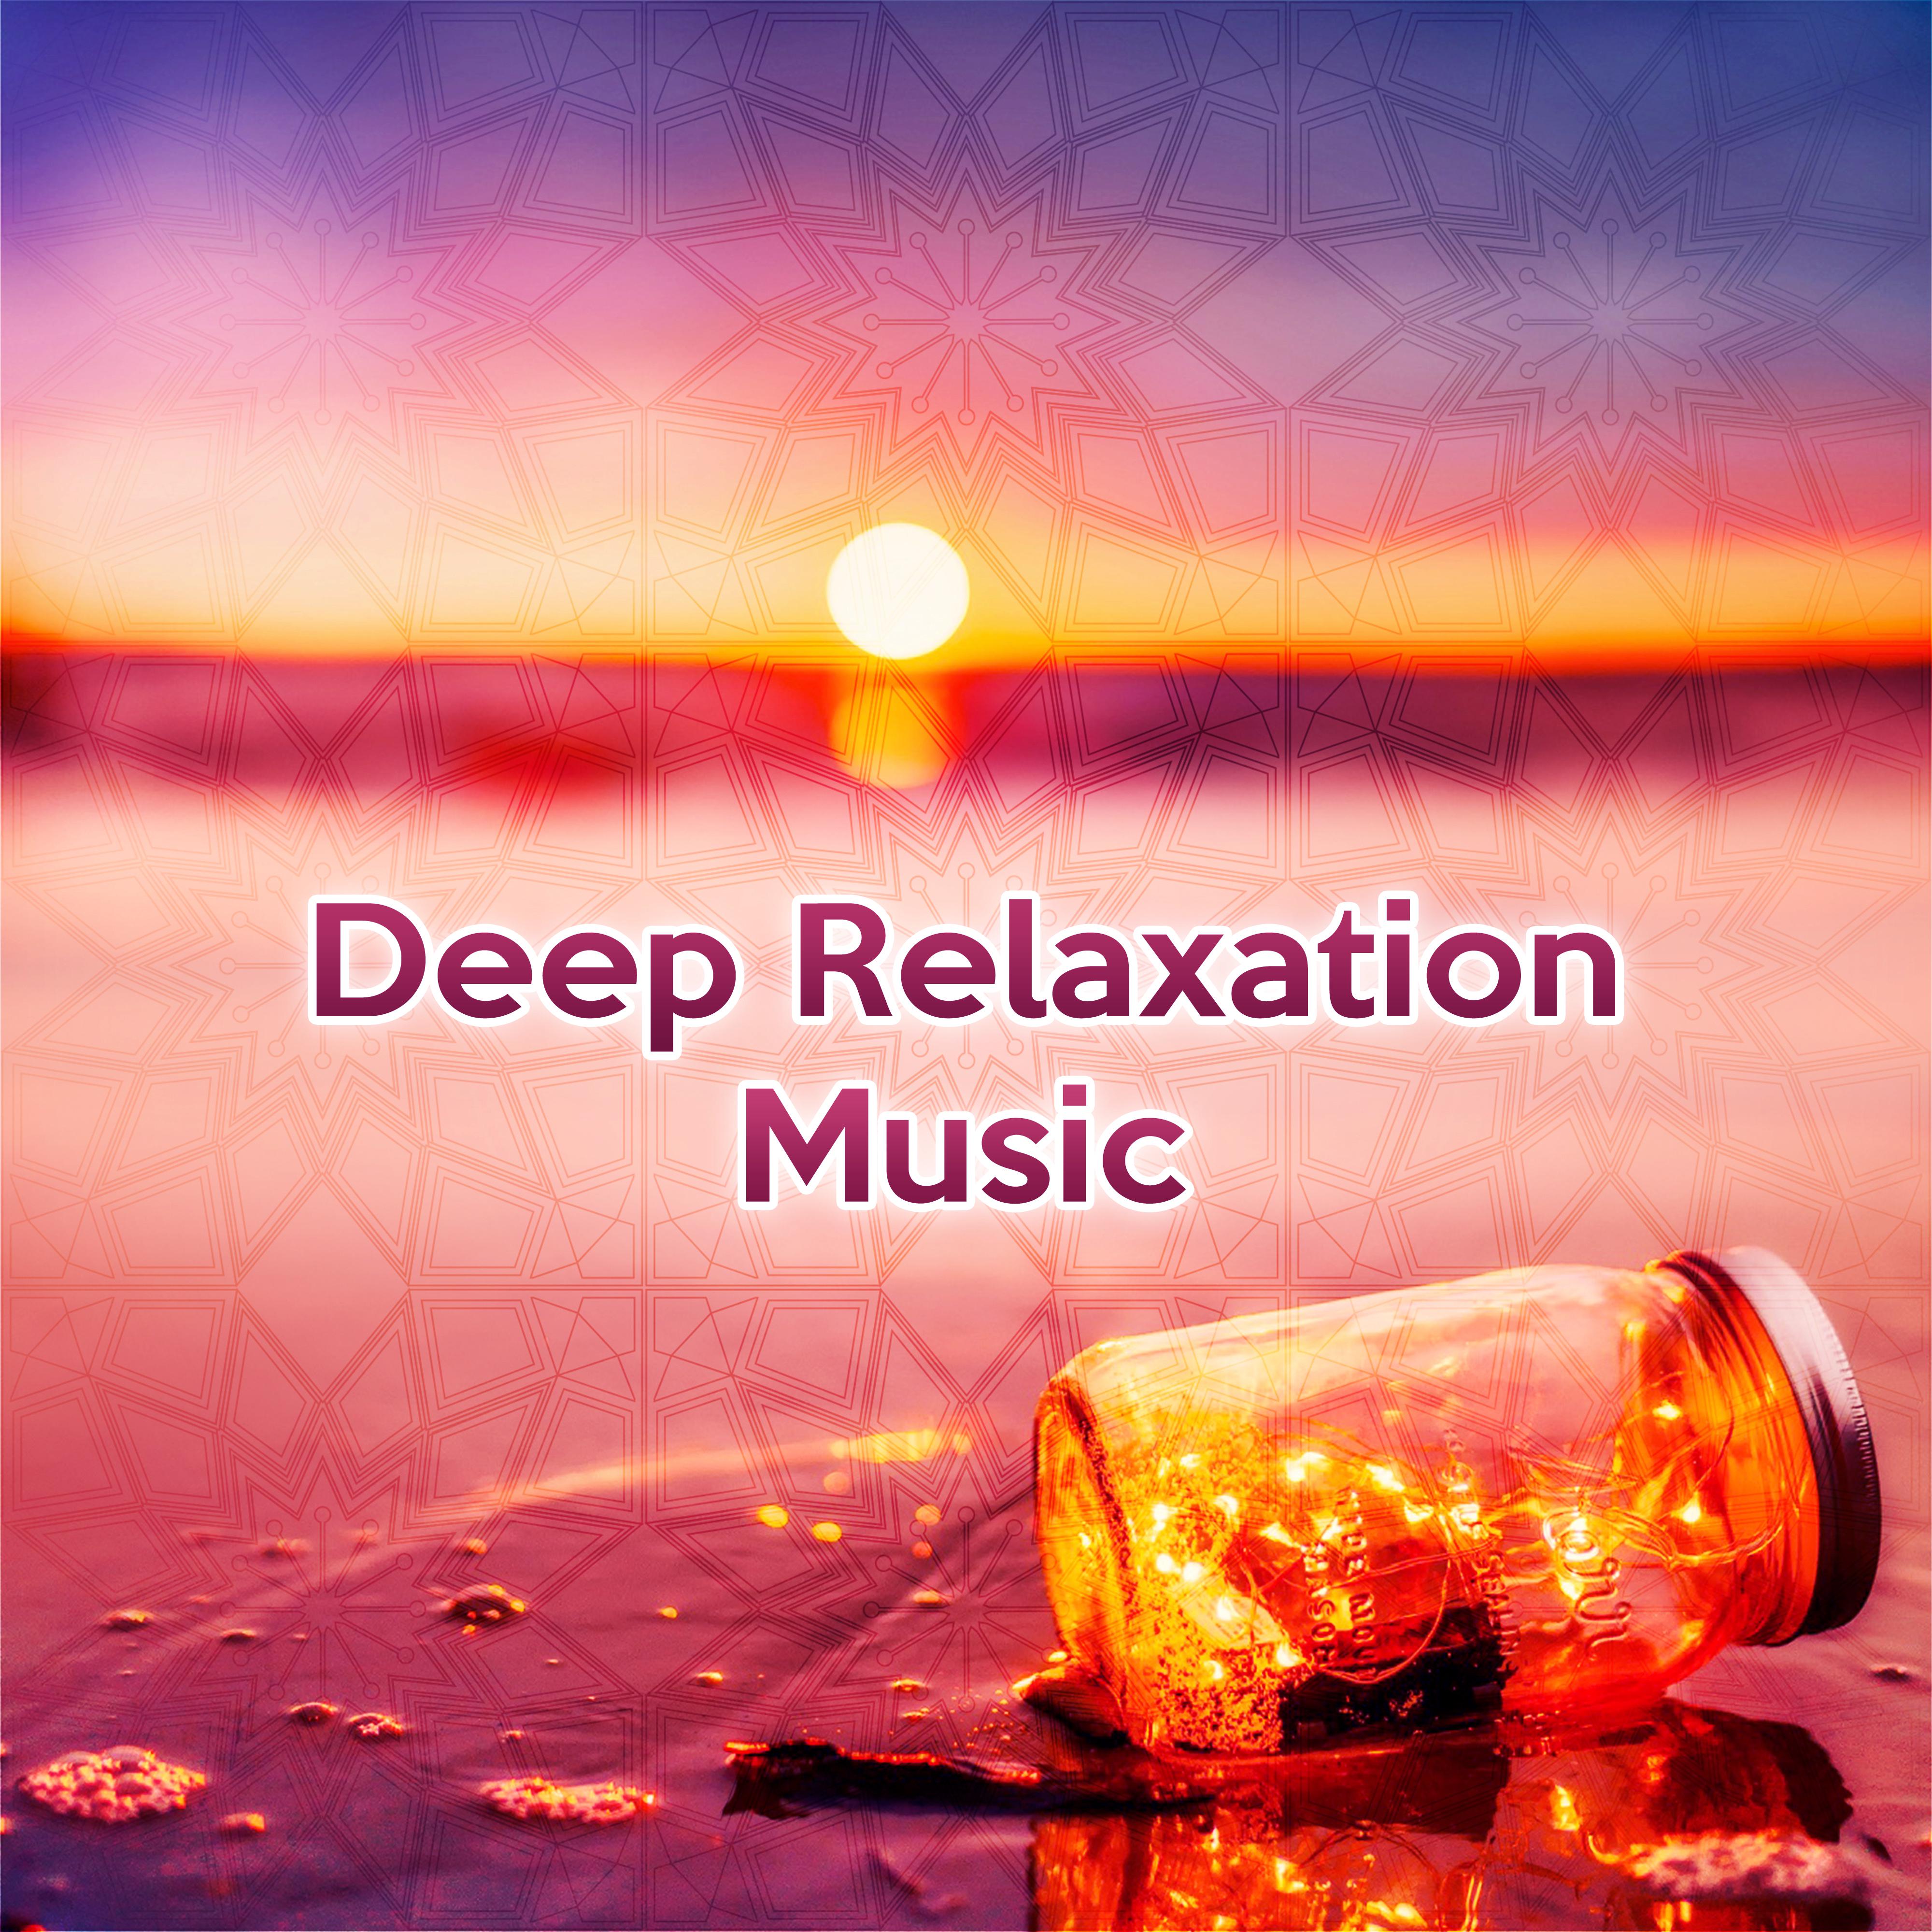 Deep Relaxation Music  Chill Out 2017, Rest on the Beach, Exotic Island, Time to Calm Down